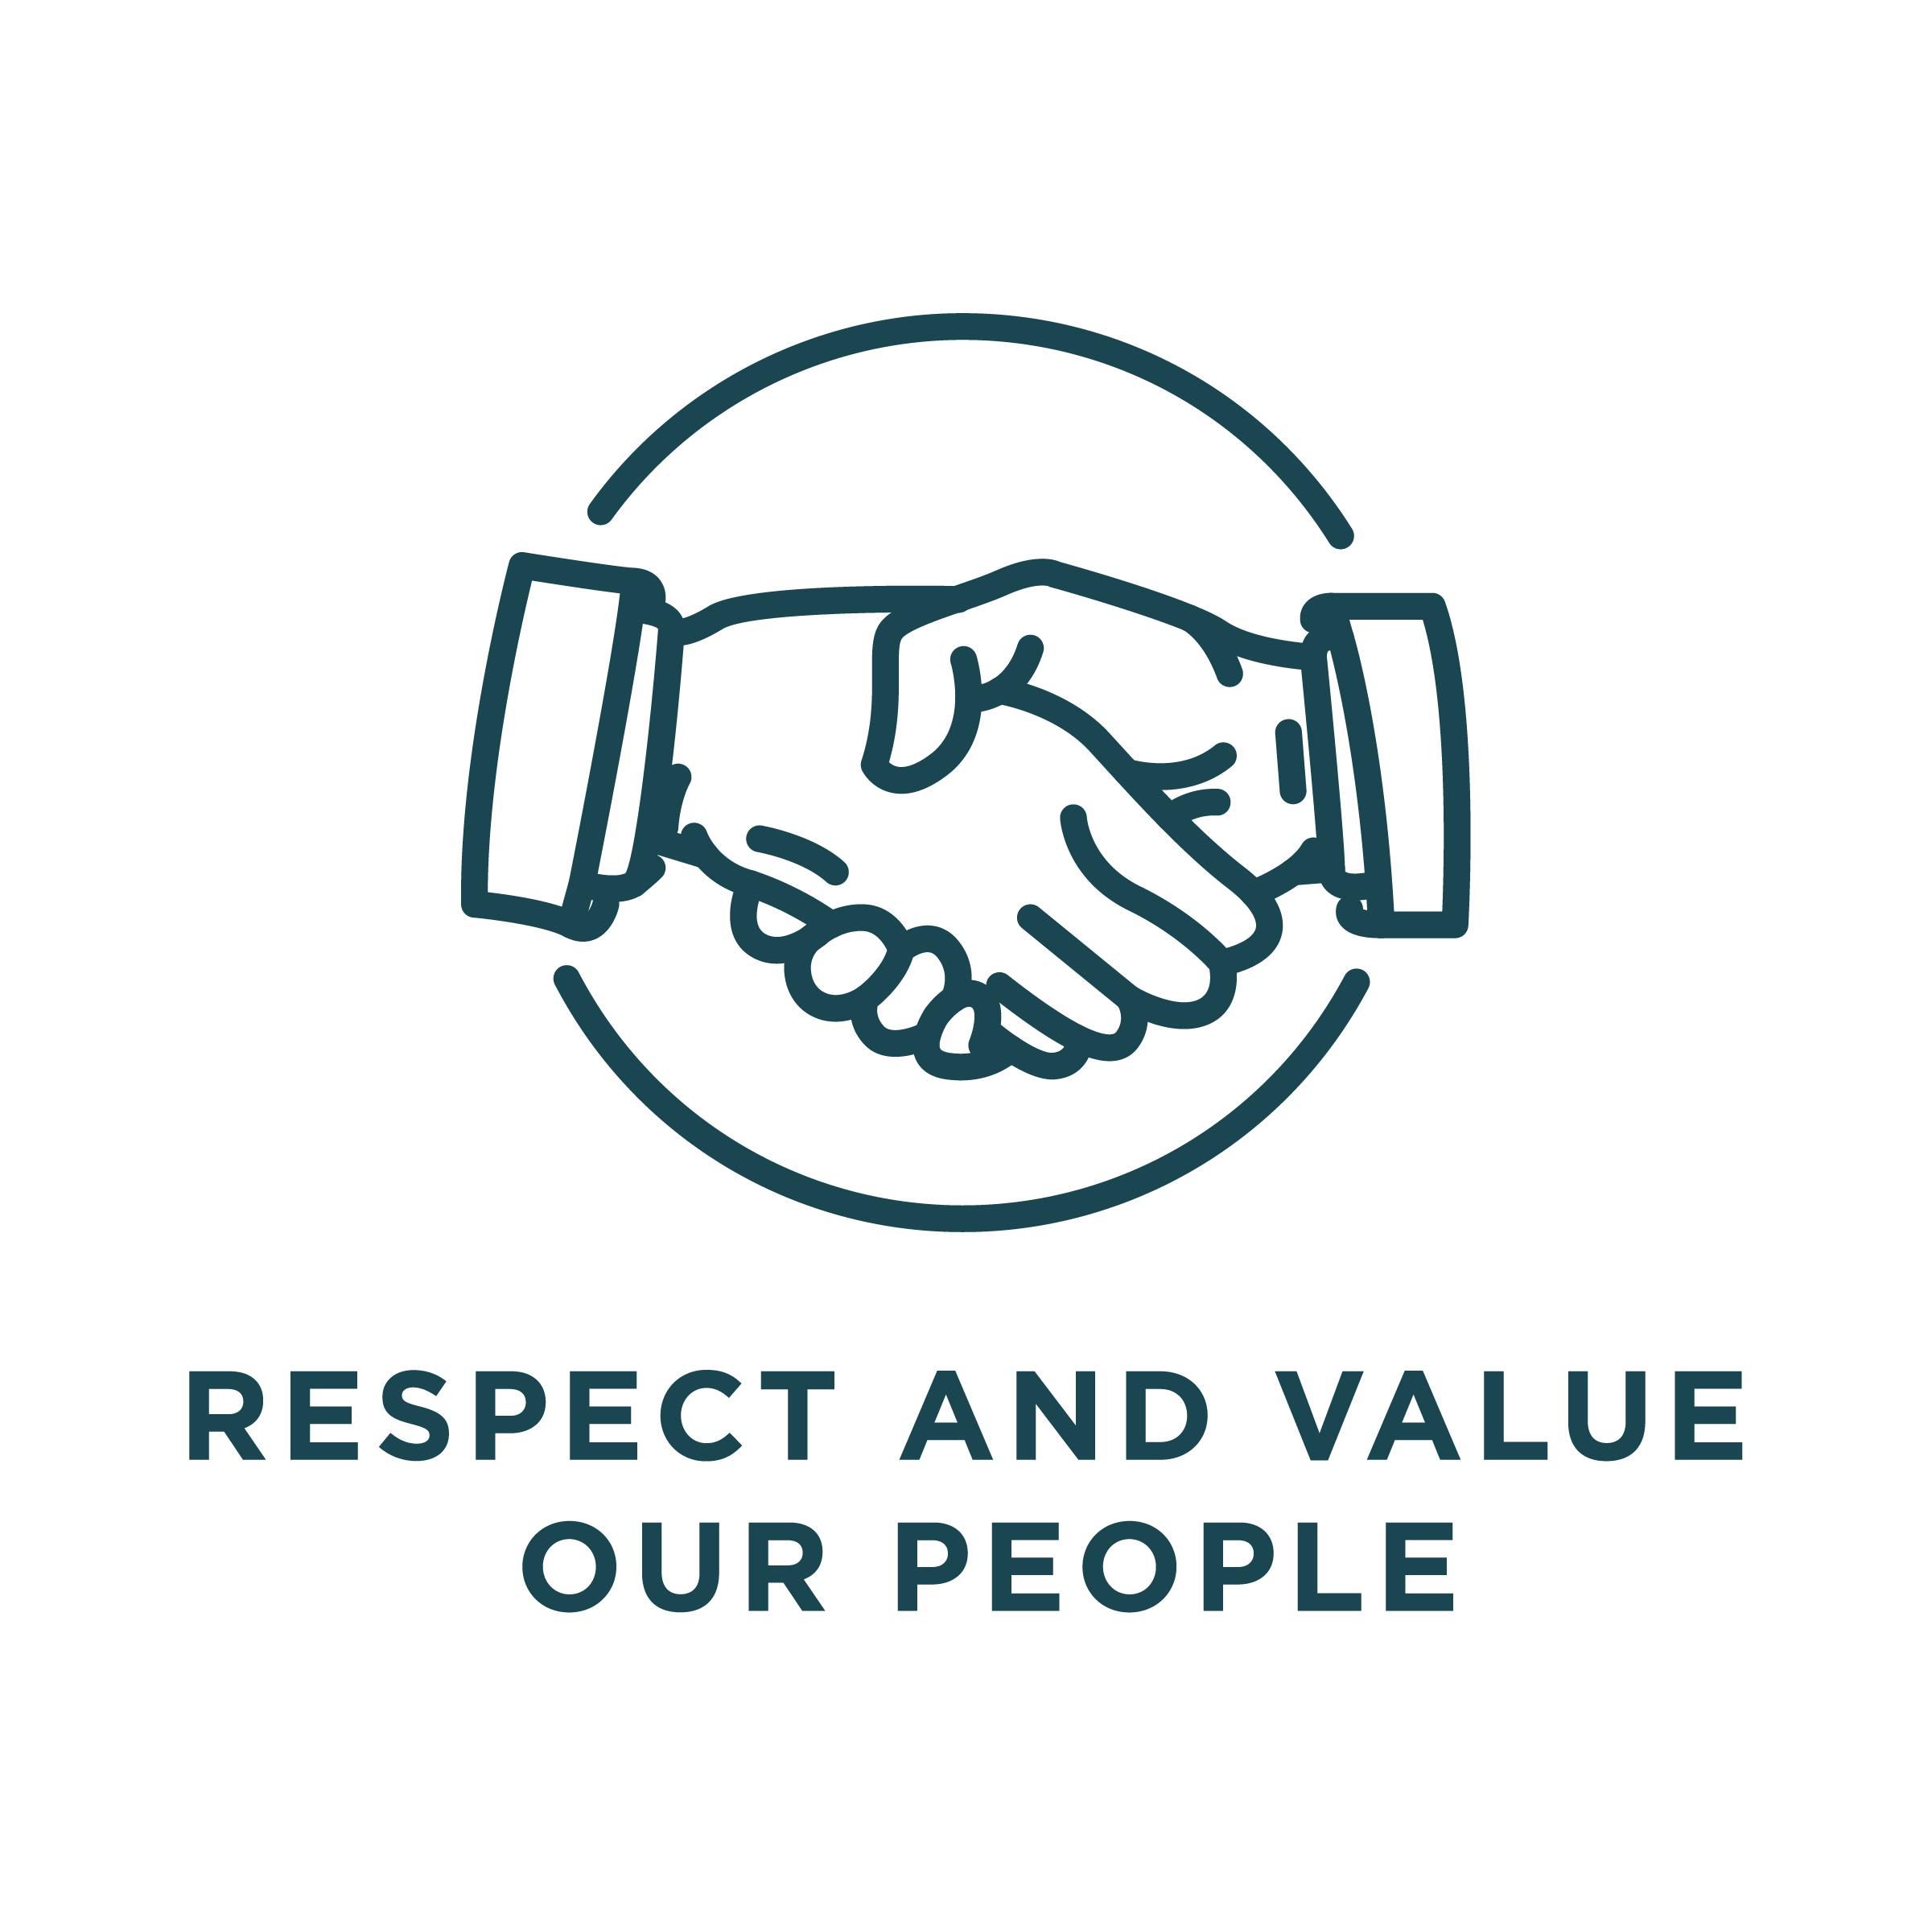 Respect and value our people logo